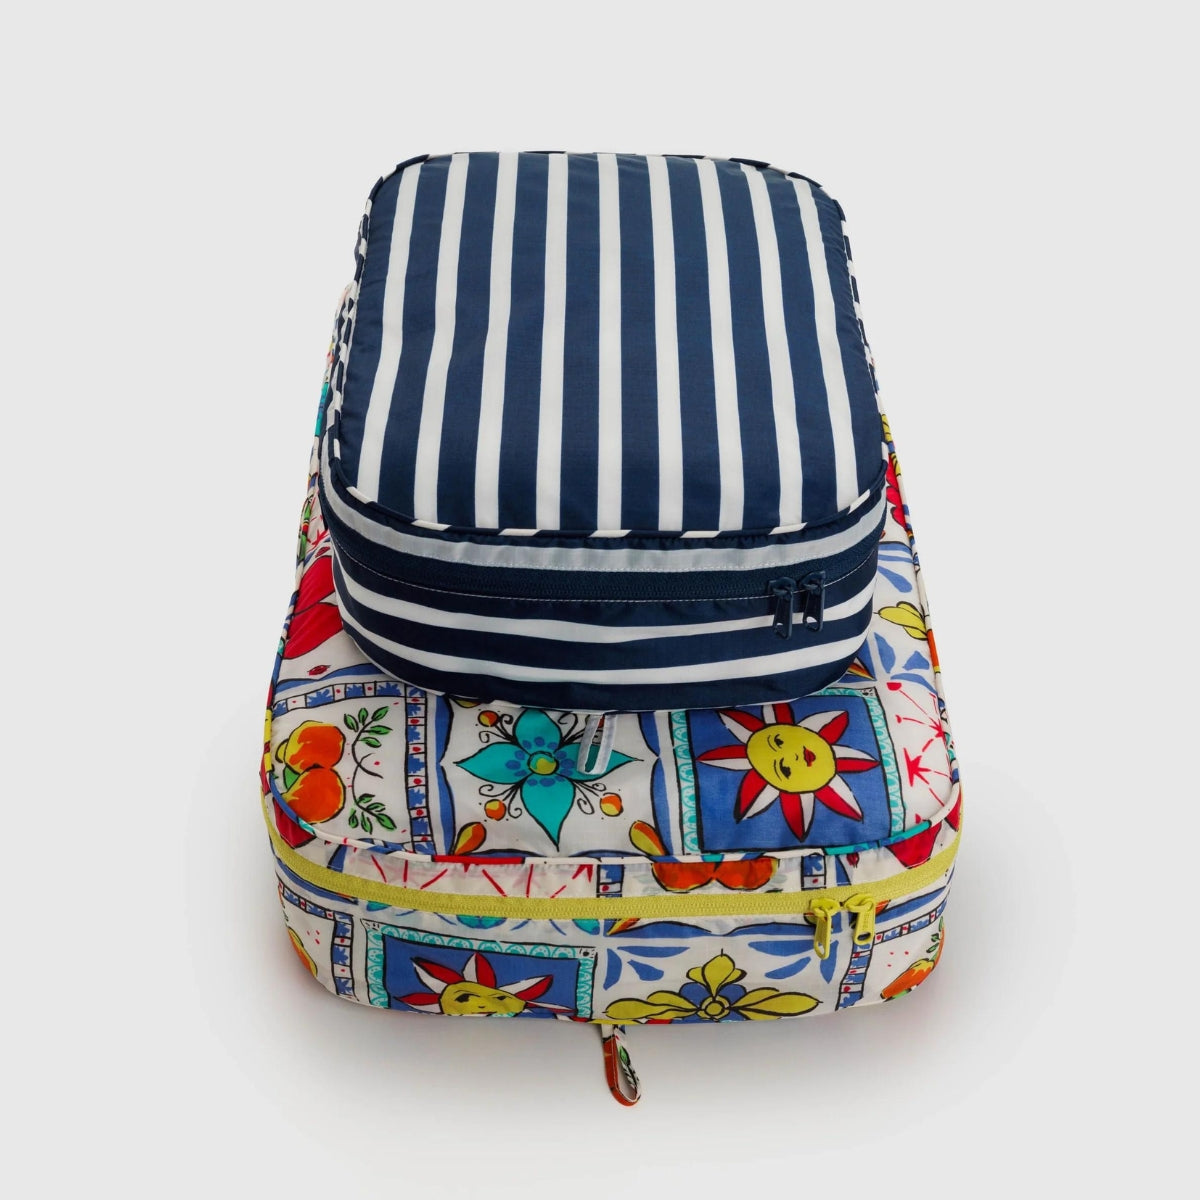 Baggu Large Packing Cube Set in Vacation Tiles